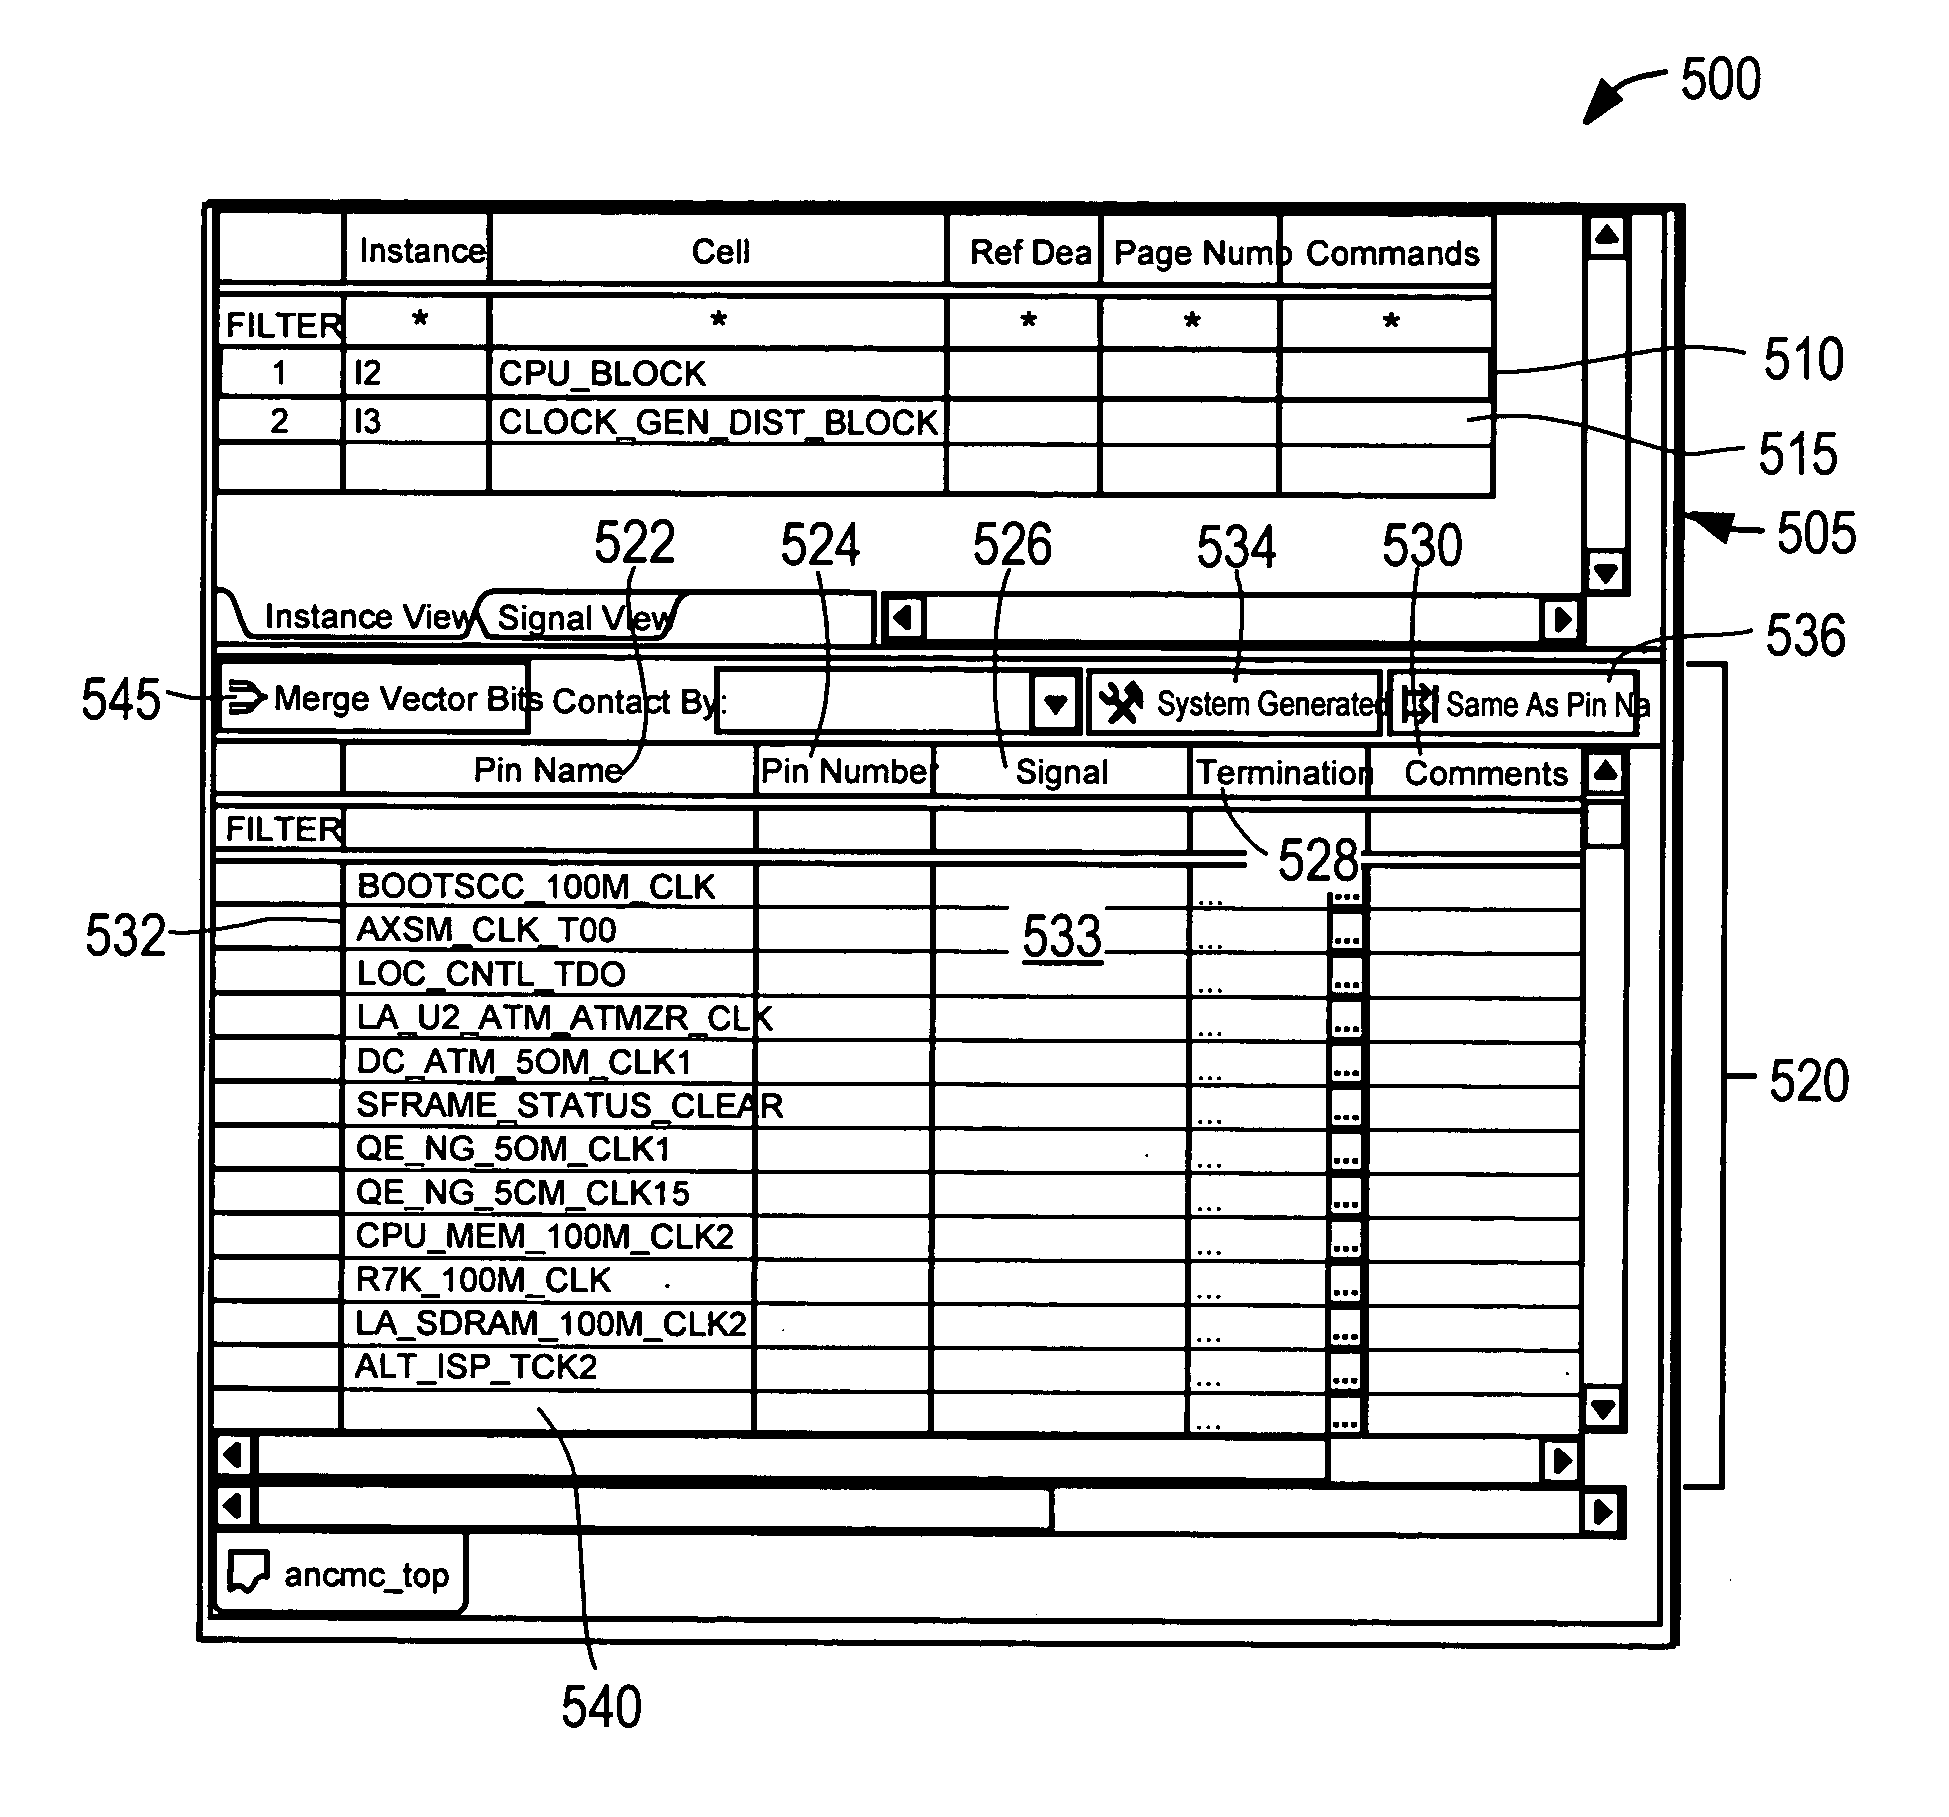 Method and apparatus for table and HDL based design entry